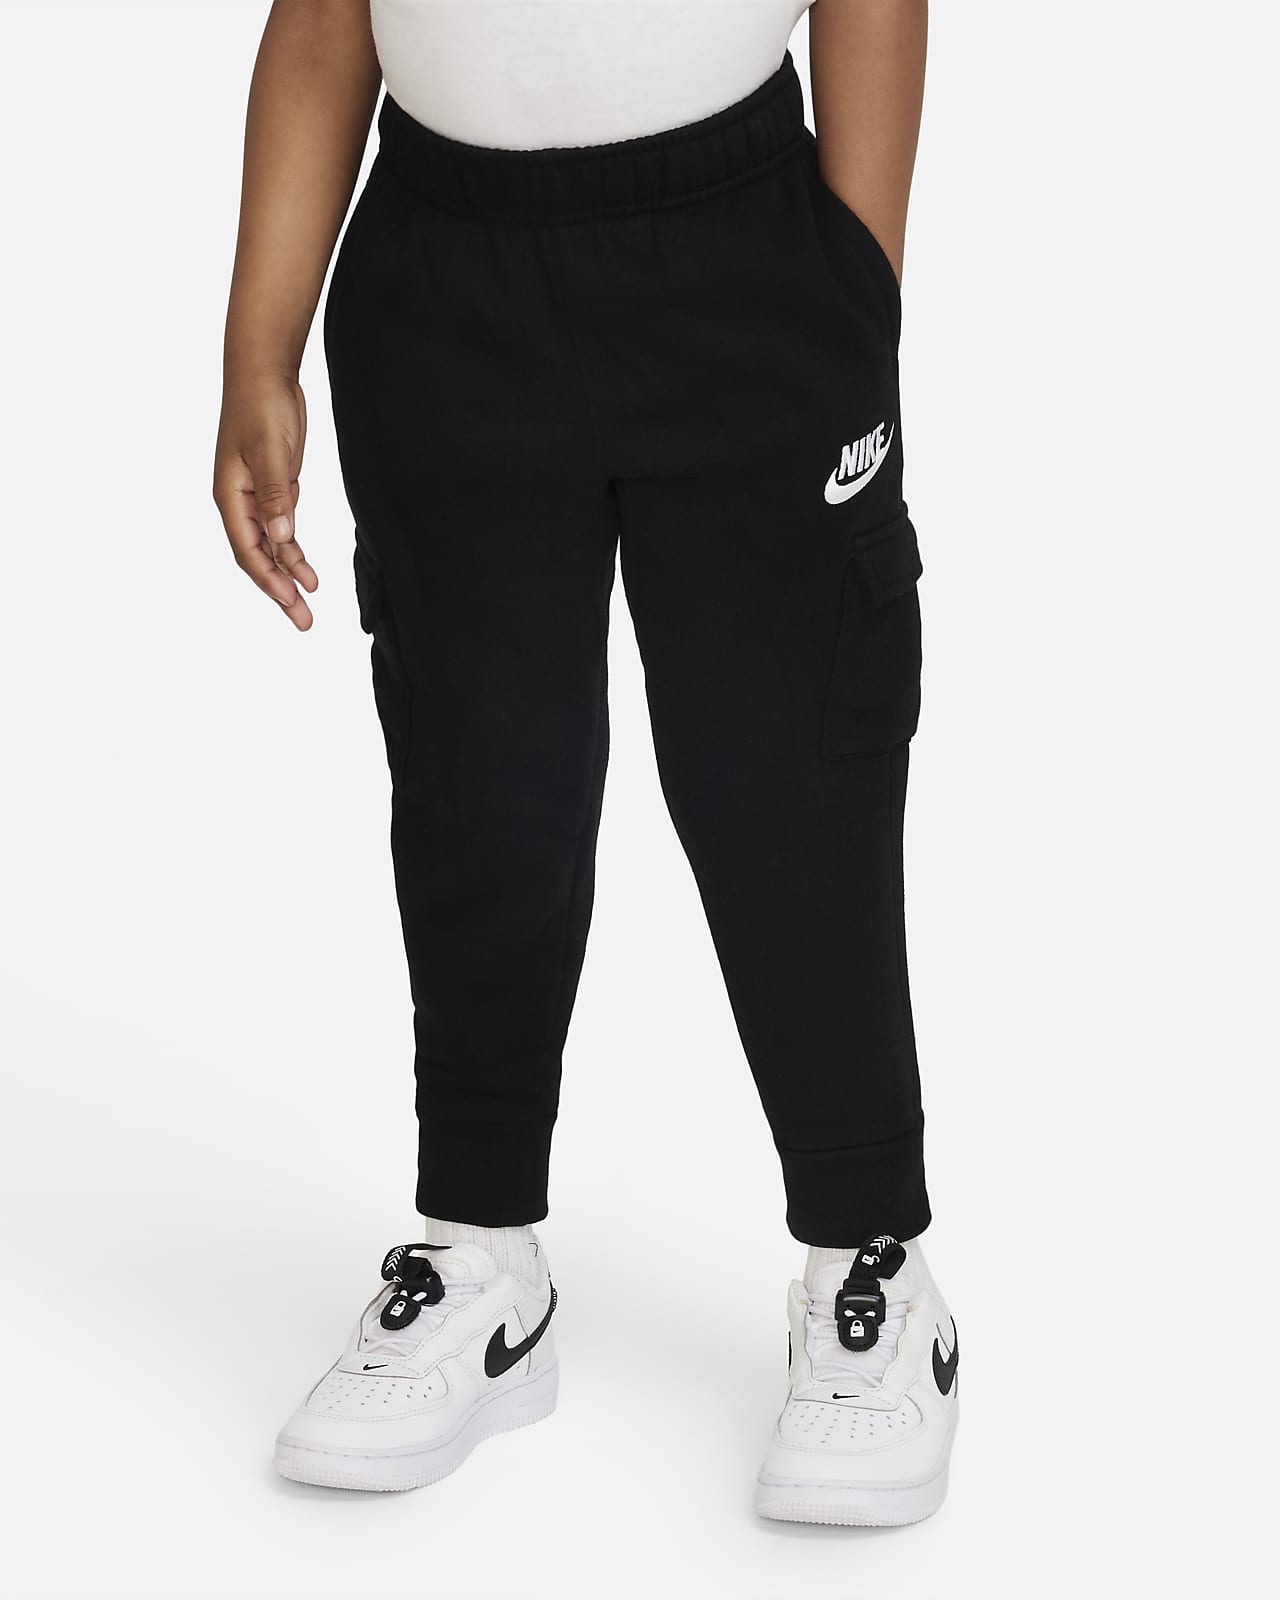 Nike Mens Air Print Cargo Pants Black Life Style Sports IE, 59% OFF